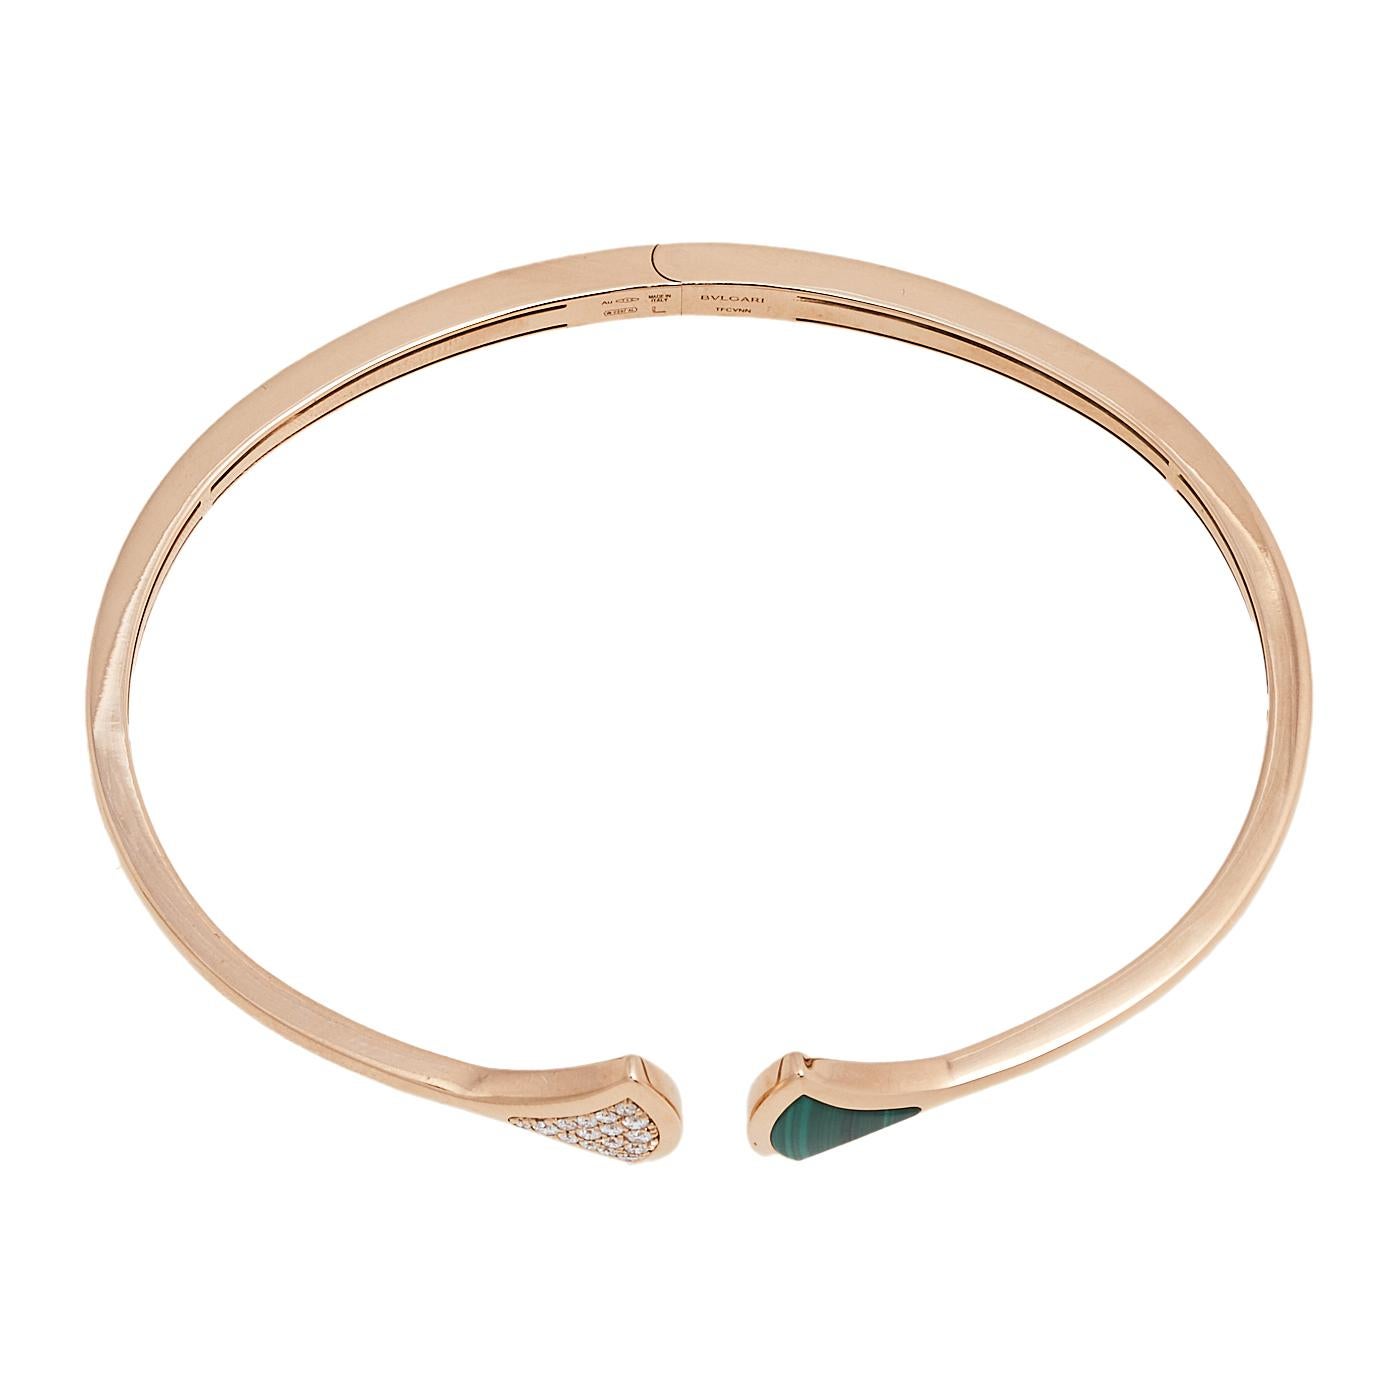 Truly meant for a diva like you, this Divas' Dream bracelet is from Bvlgari. It has been magnificently crafted from 18k rose gold and designed with fan-shaped ends, one embedded with diamonds and the other with malachite. The piece has been finely